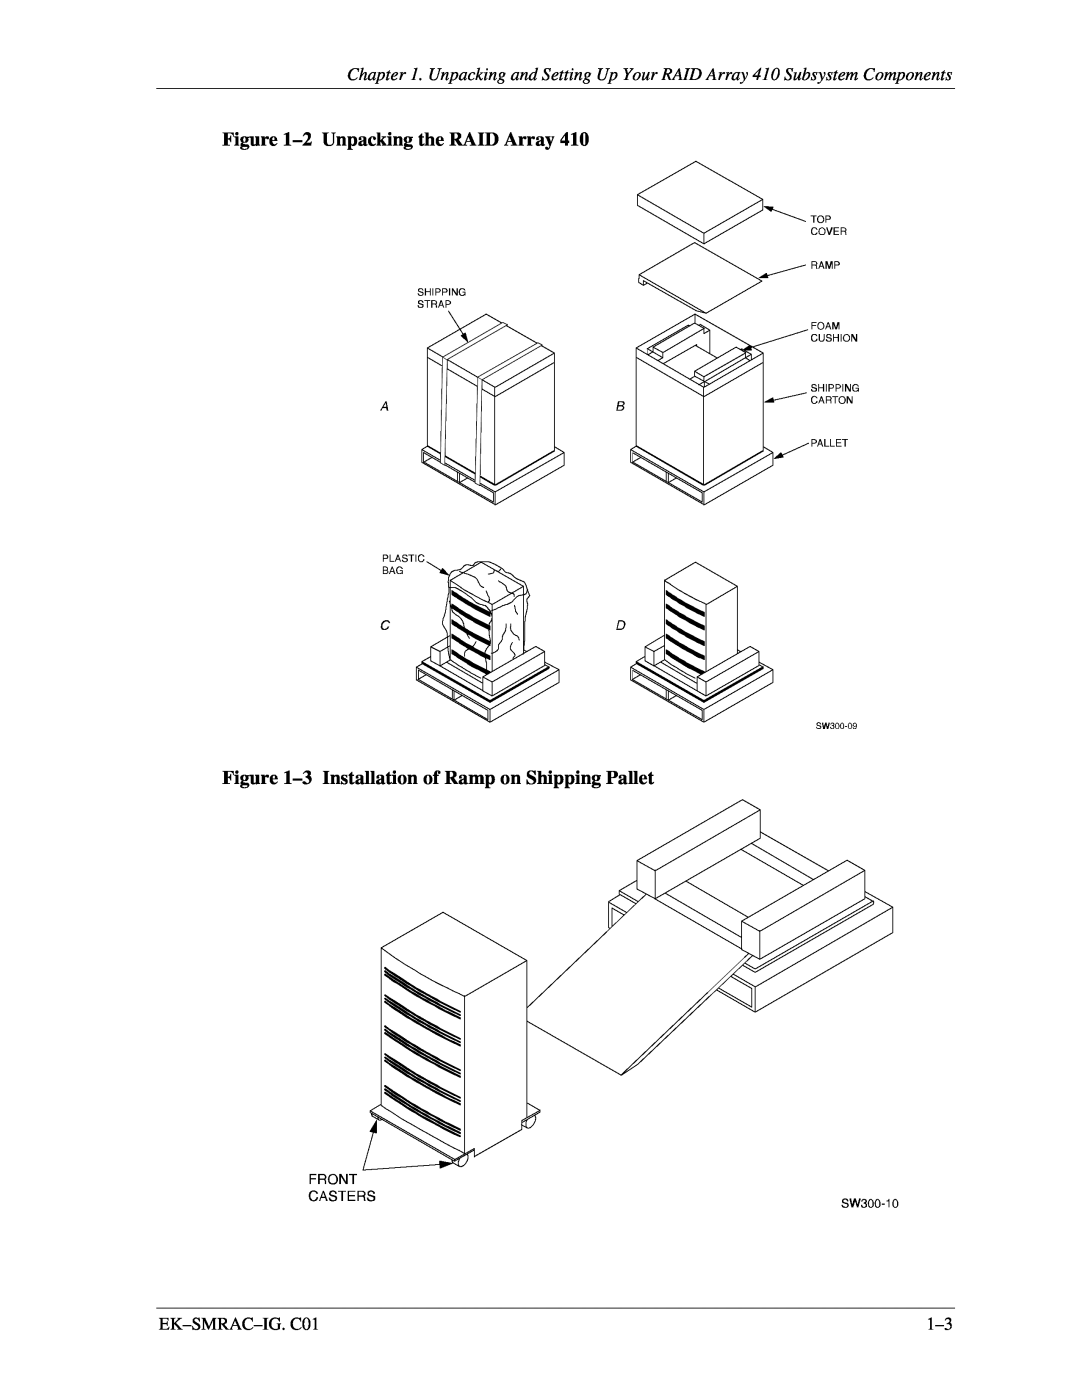 Intel 410 manual 2Unpacking the RAID Array, 3Installation of Ramp on Shipping Pallet 